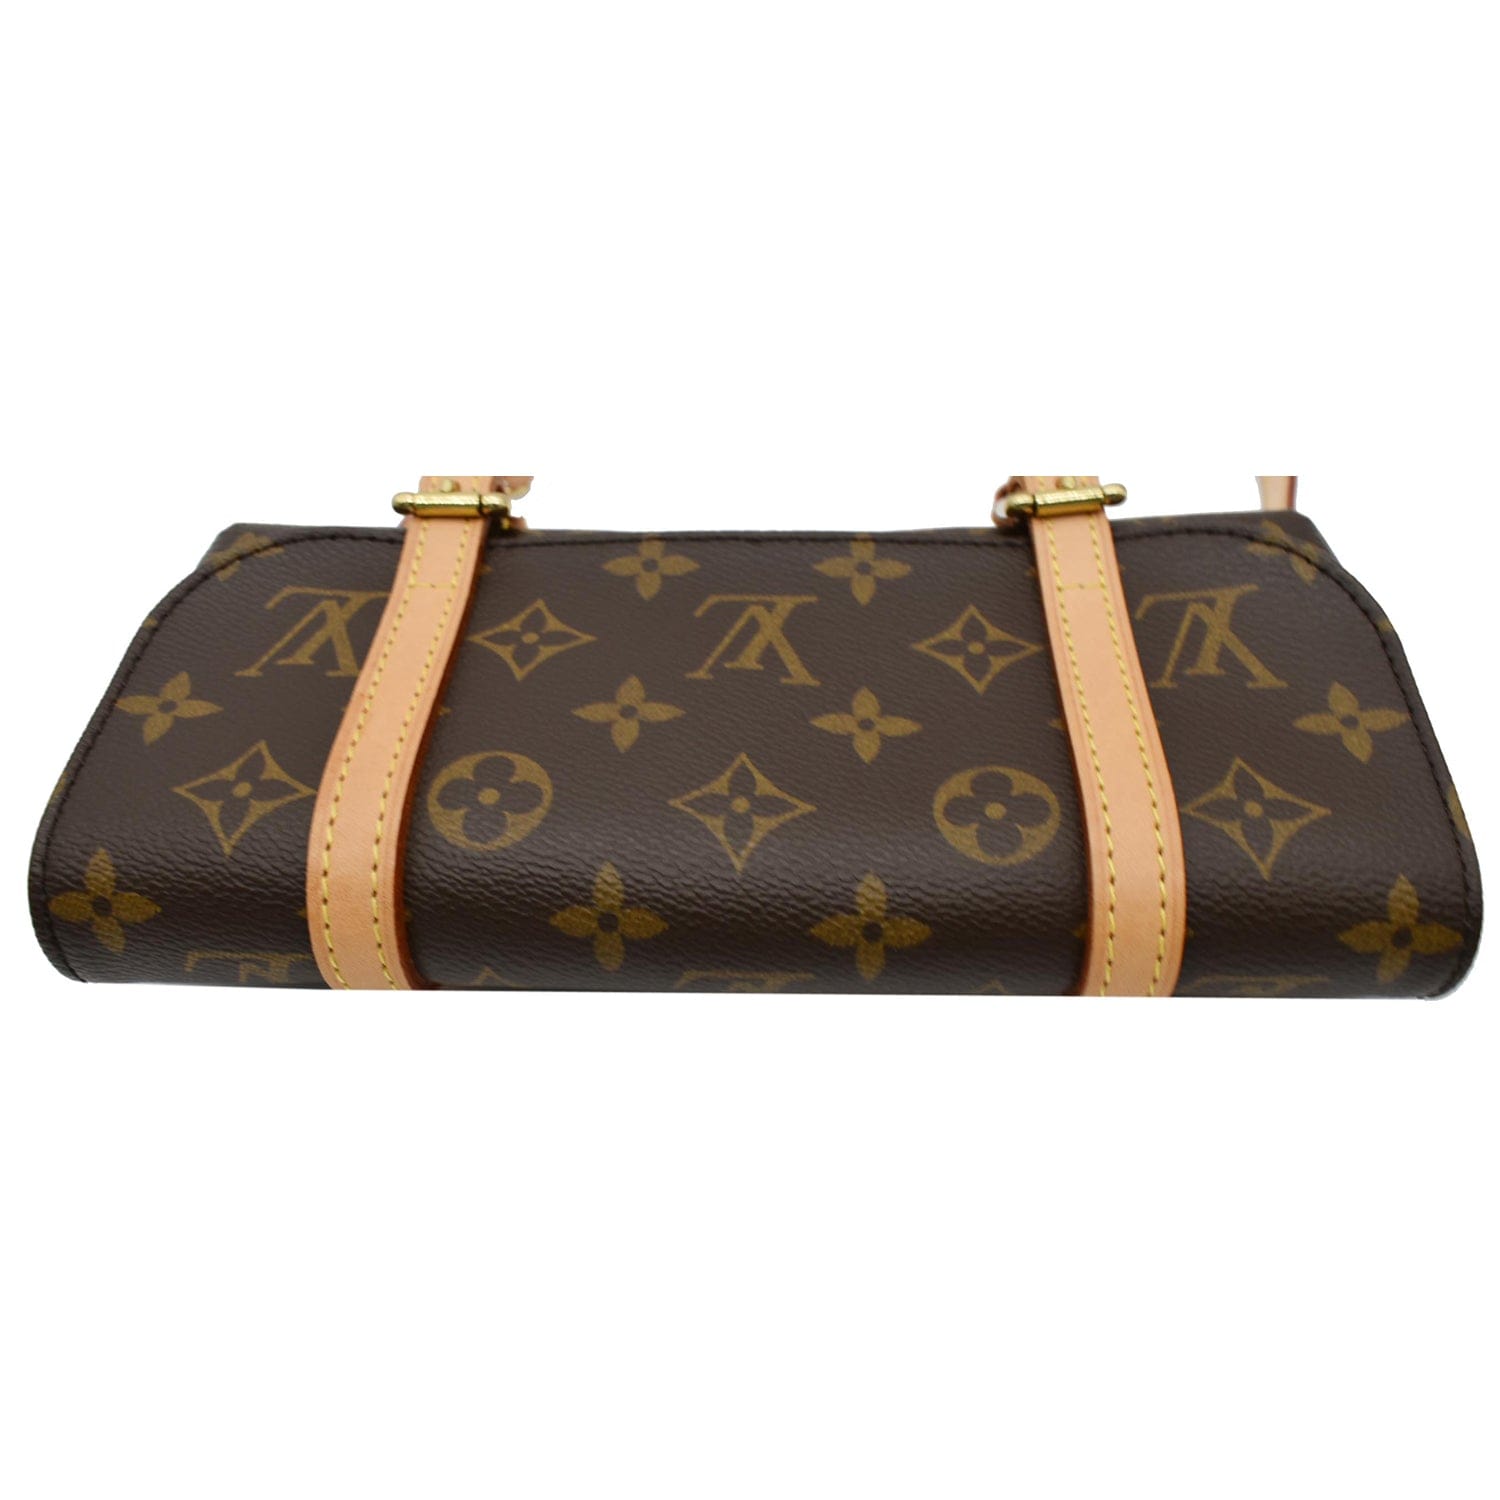 Louis Vuitton MARELLE NM What FITS First Impressions & COMPARISONS